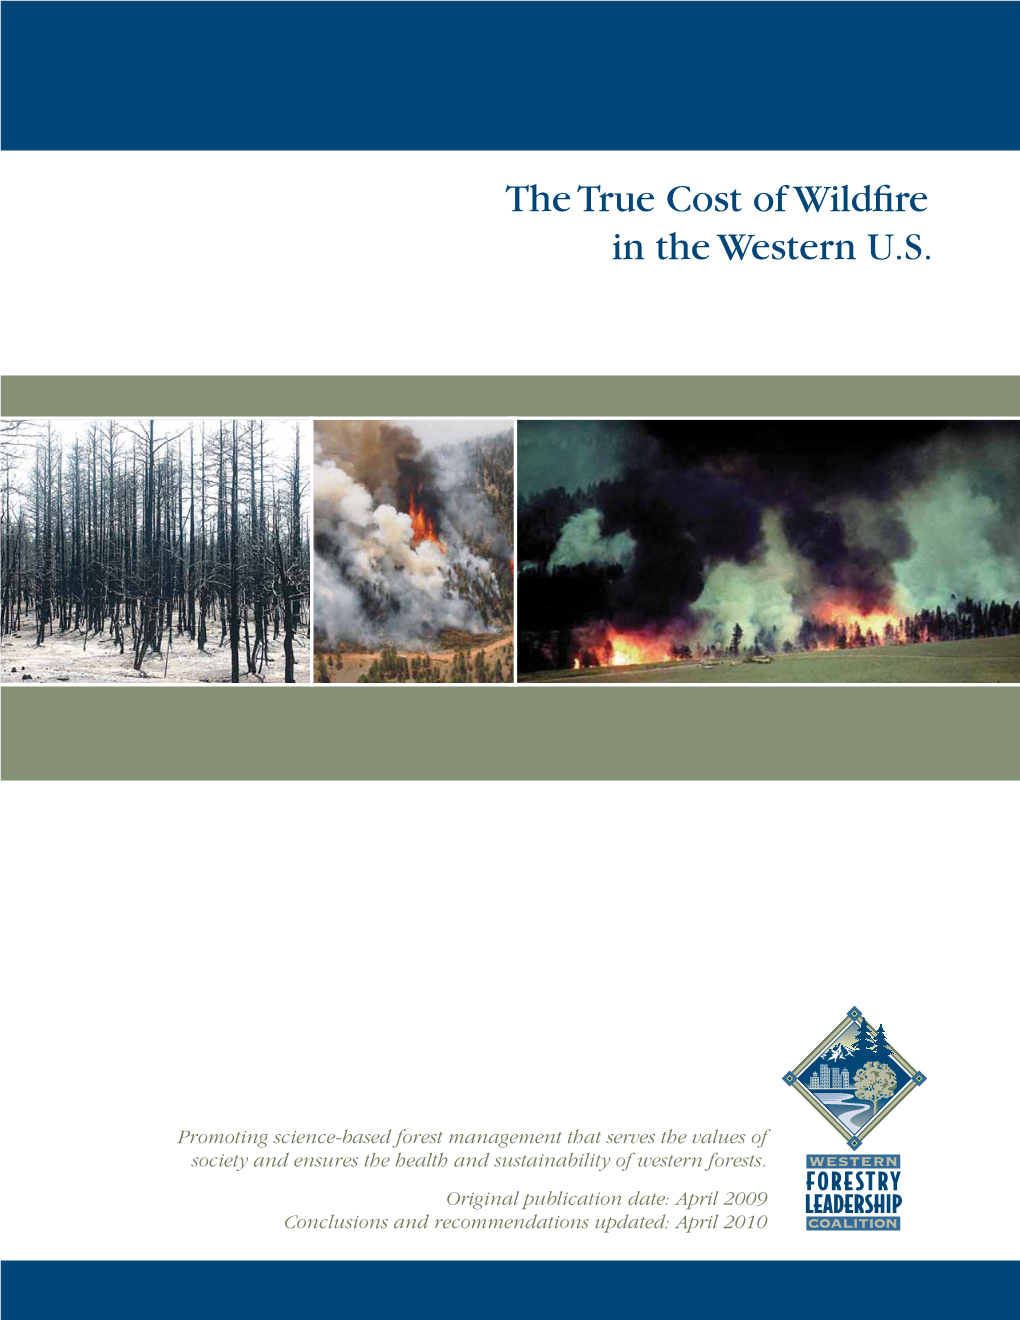 The True Cost of Wildfire in the Western U.S